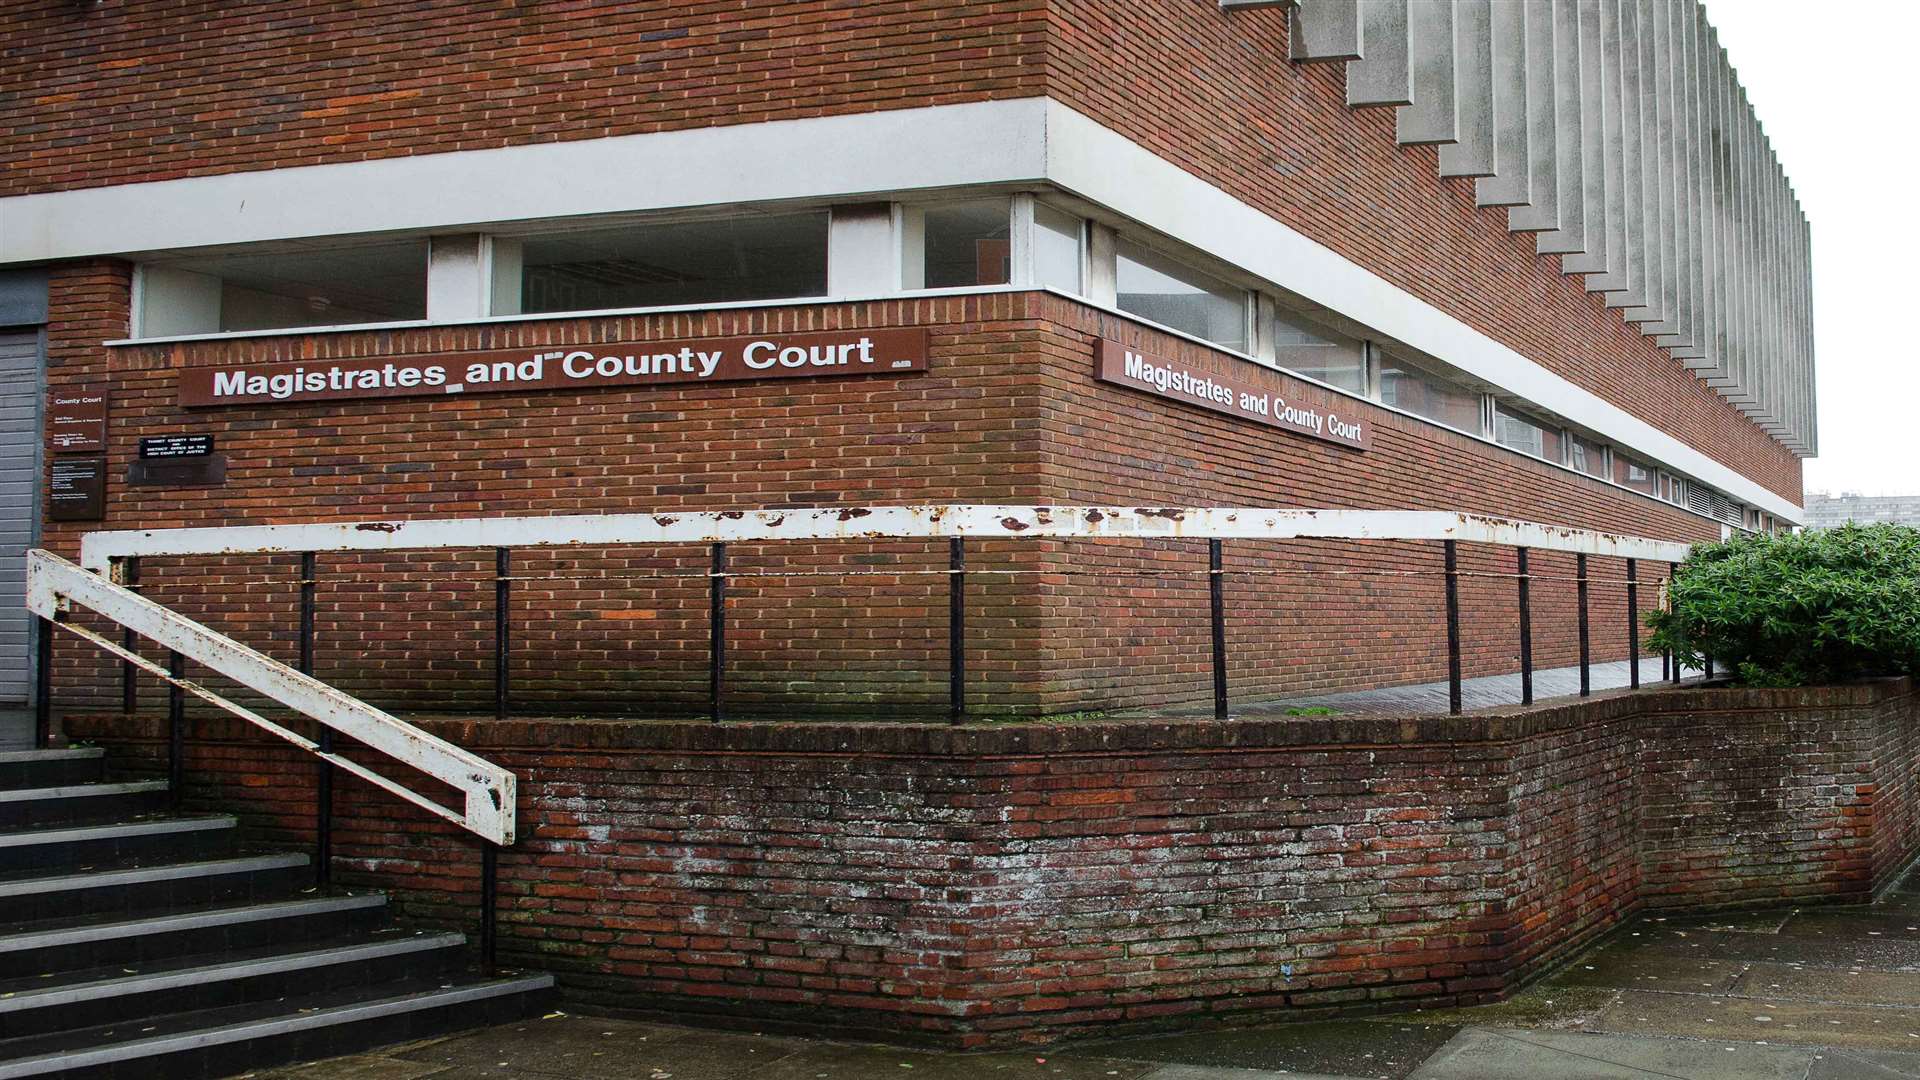 Margate Magistrates' Court